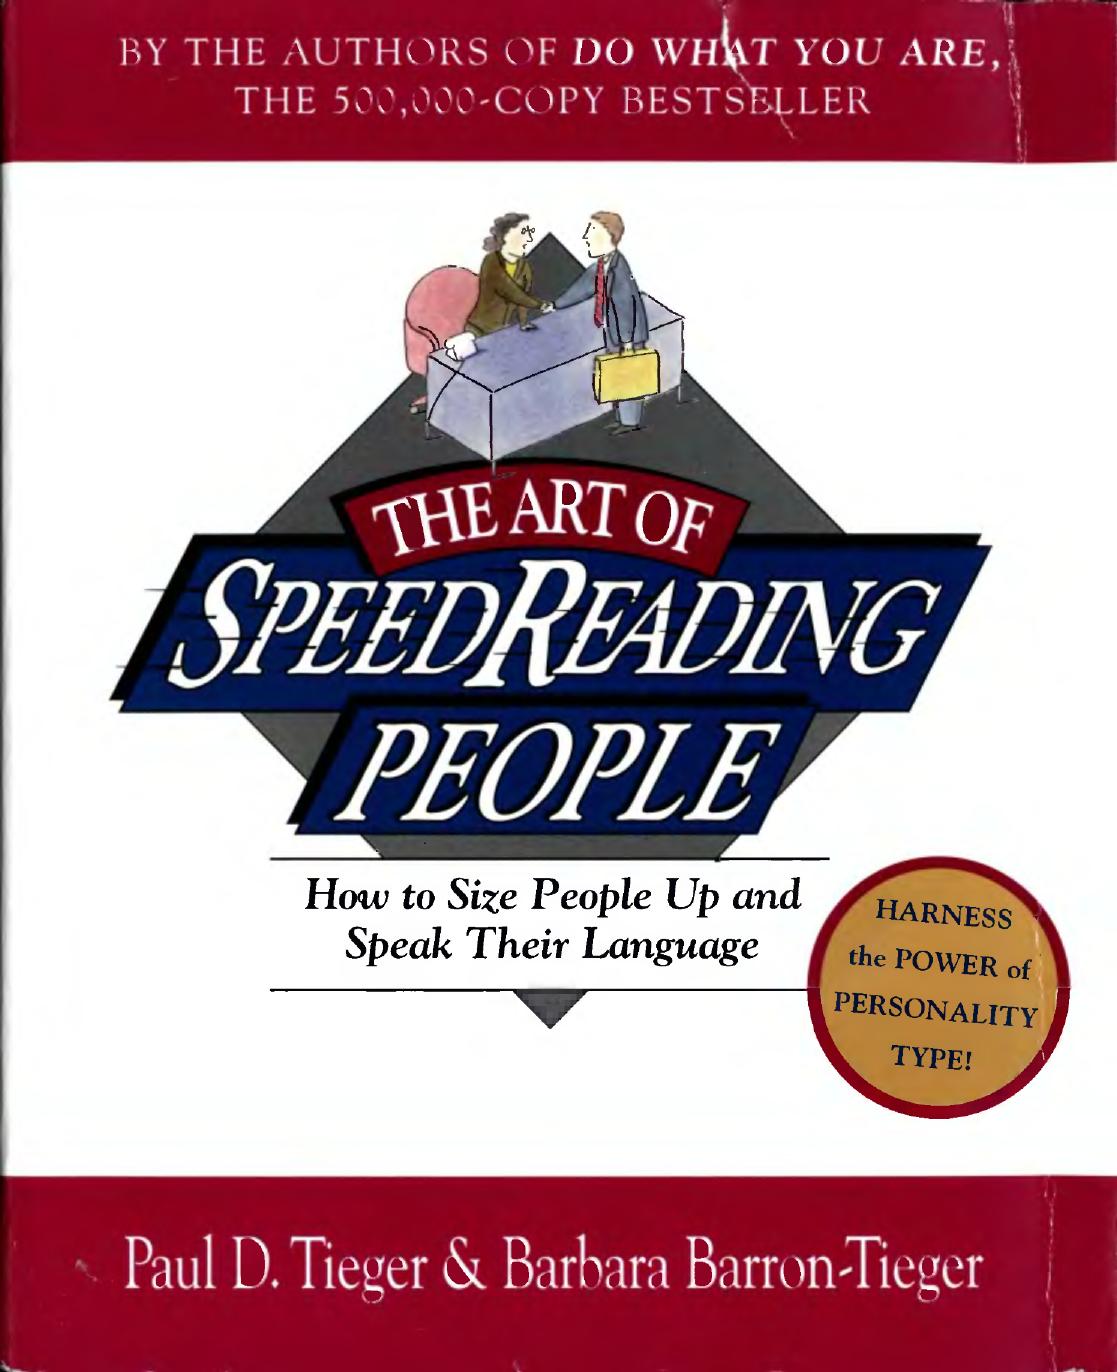 The Art of Speed Reading People How to Size People Up and Speak Their Language by Paul D. Tieger by Unknown